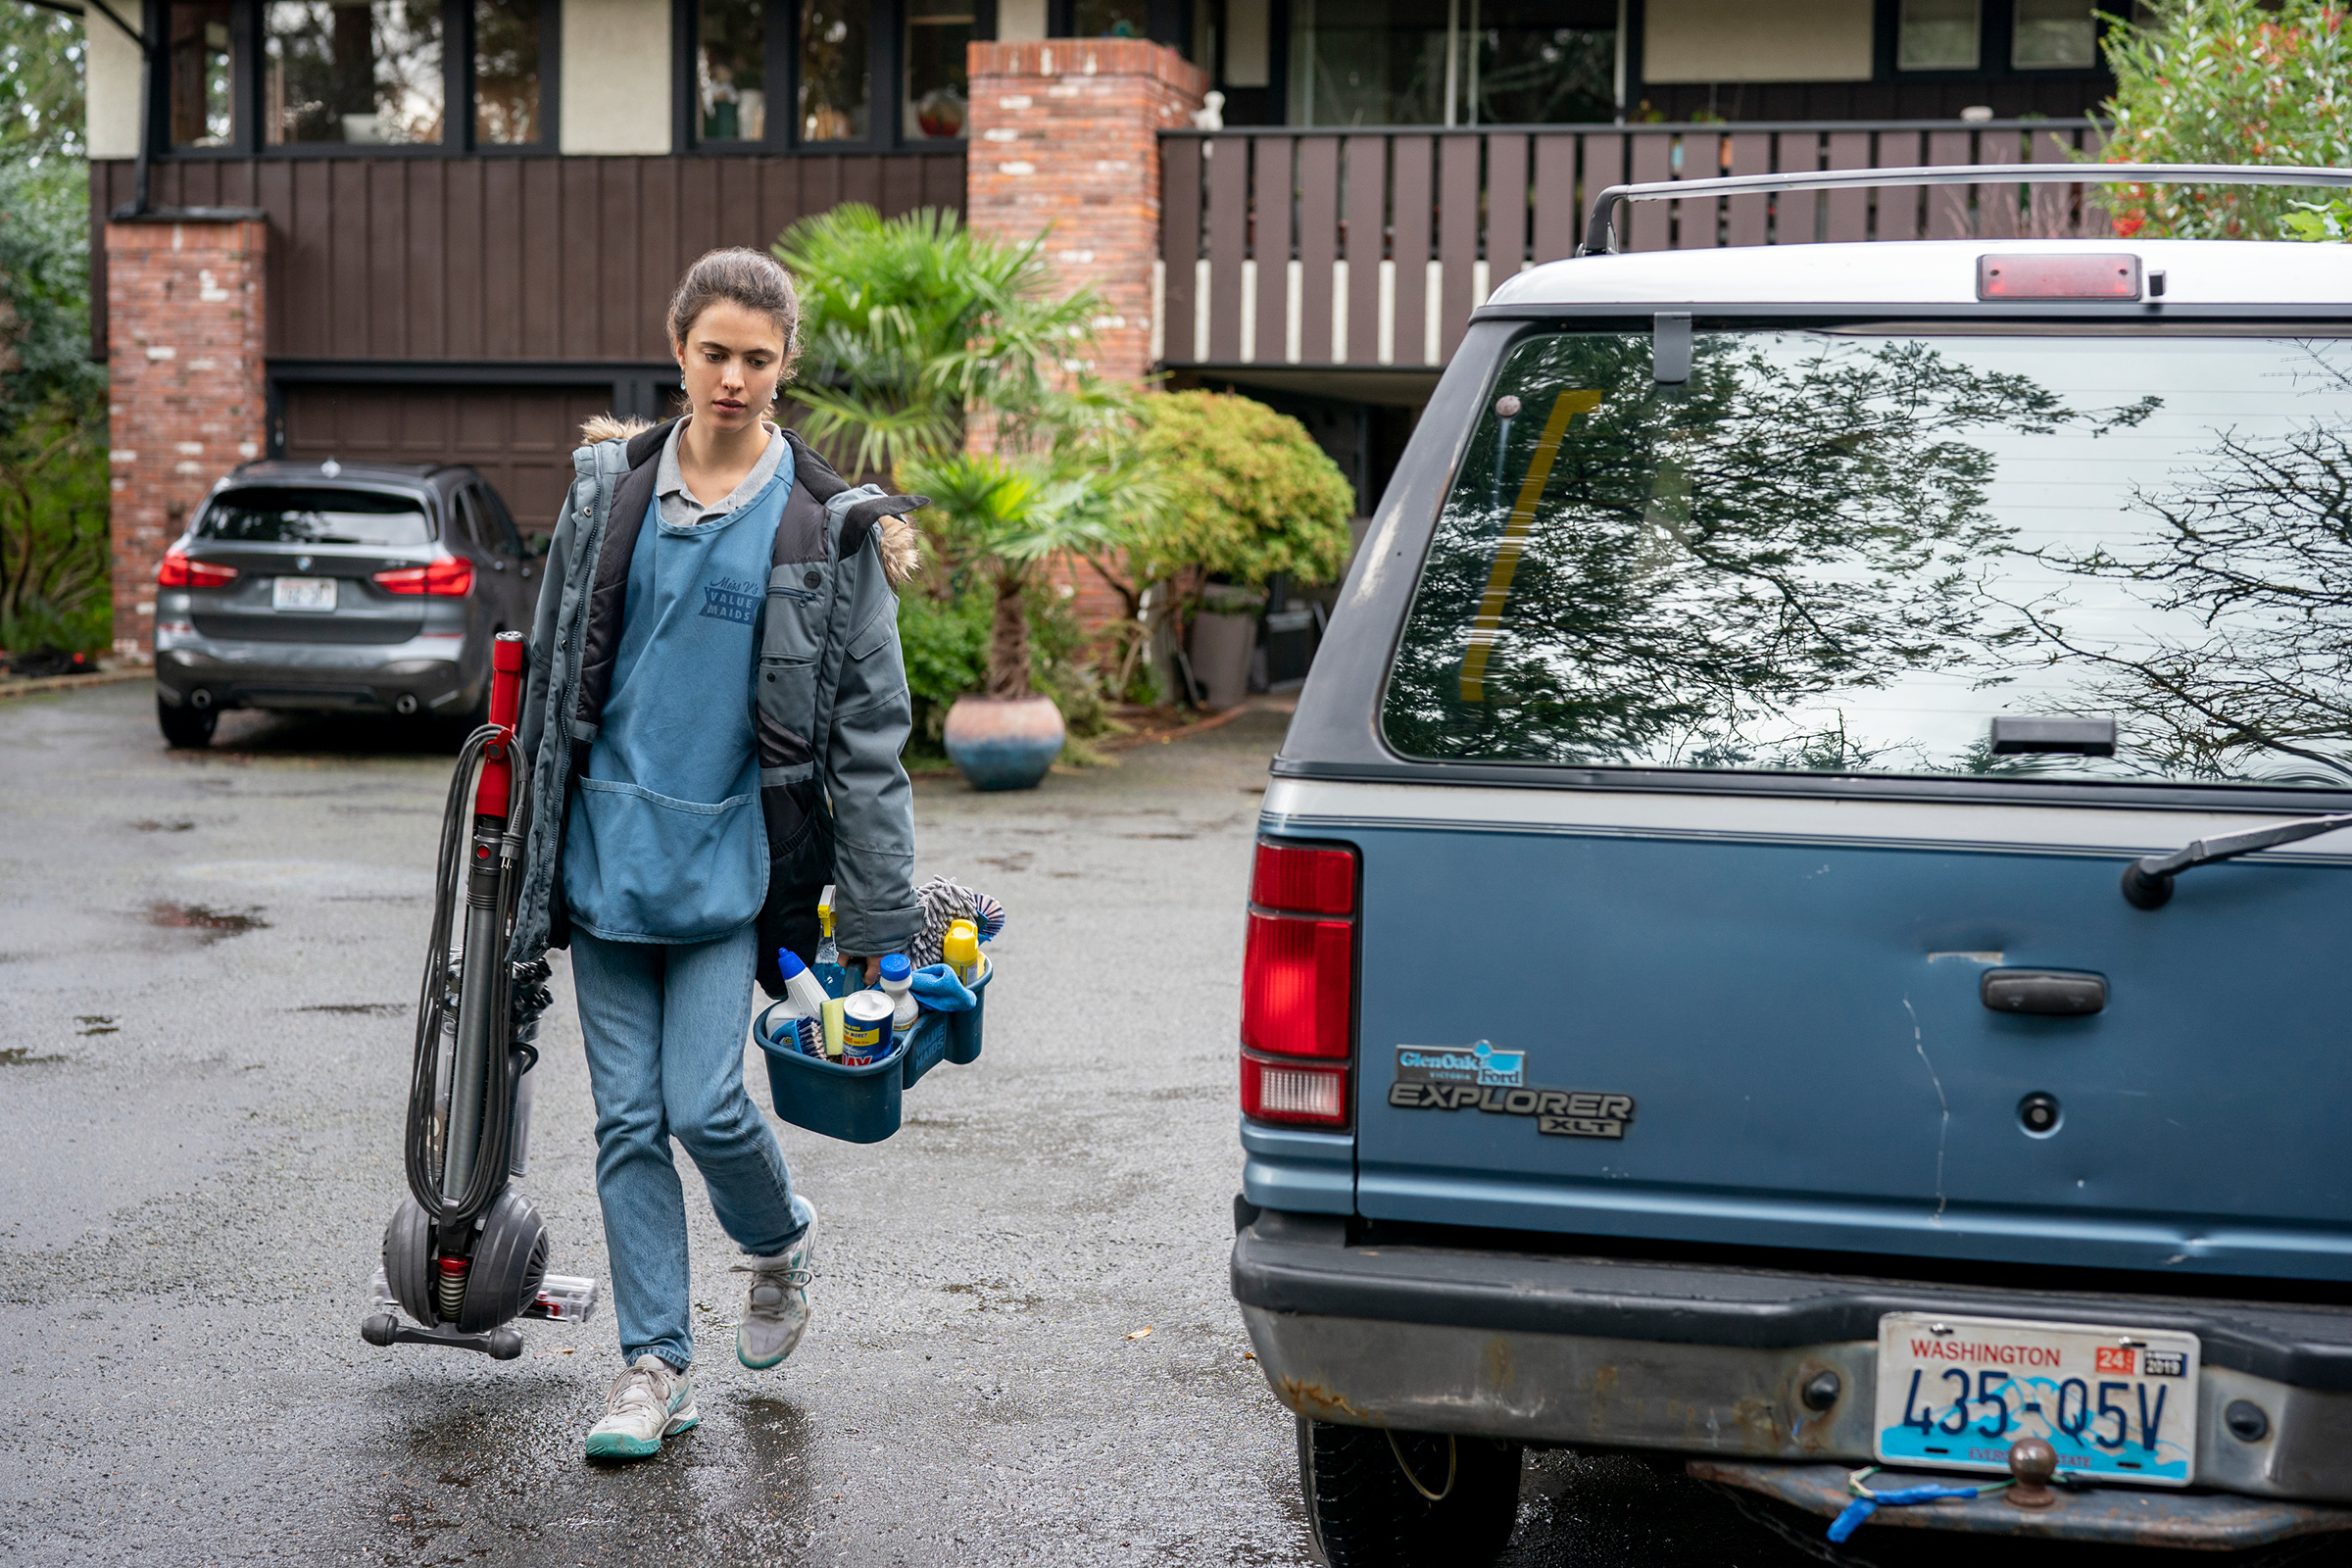 Margaret Qualley plays a single mom who works as a house cleaner in the Netflix series Maid